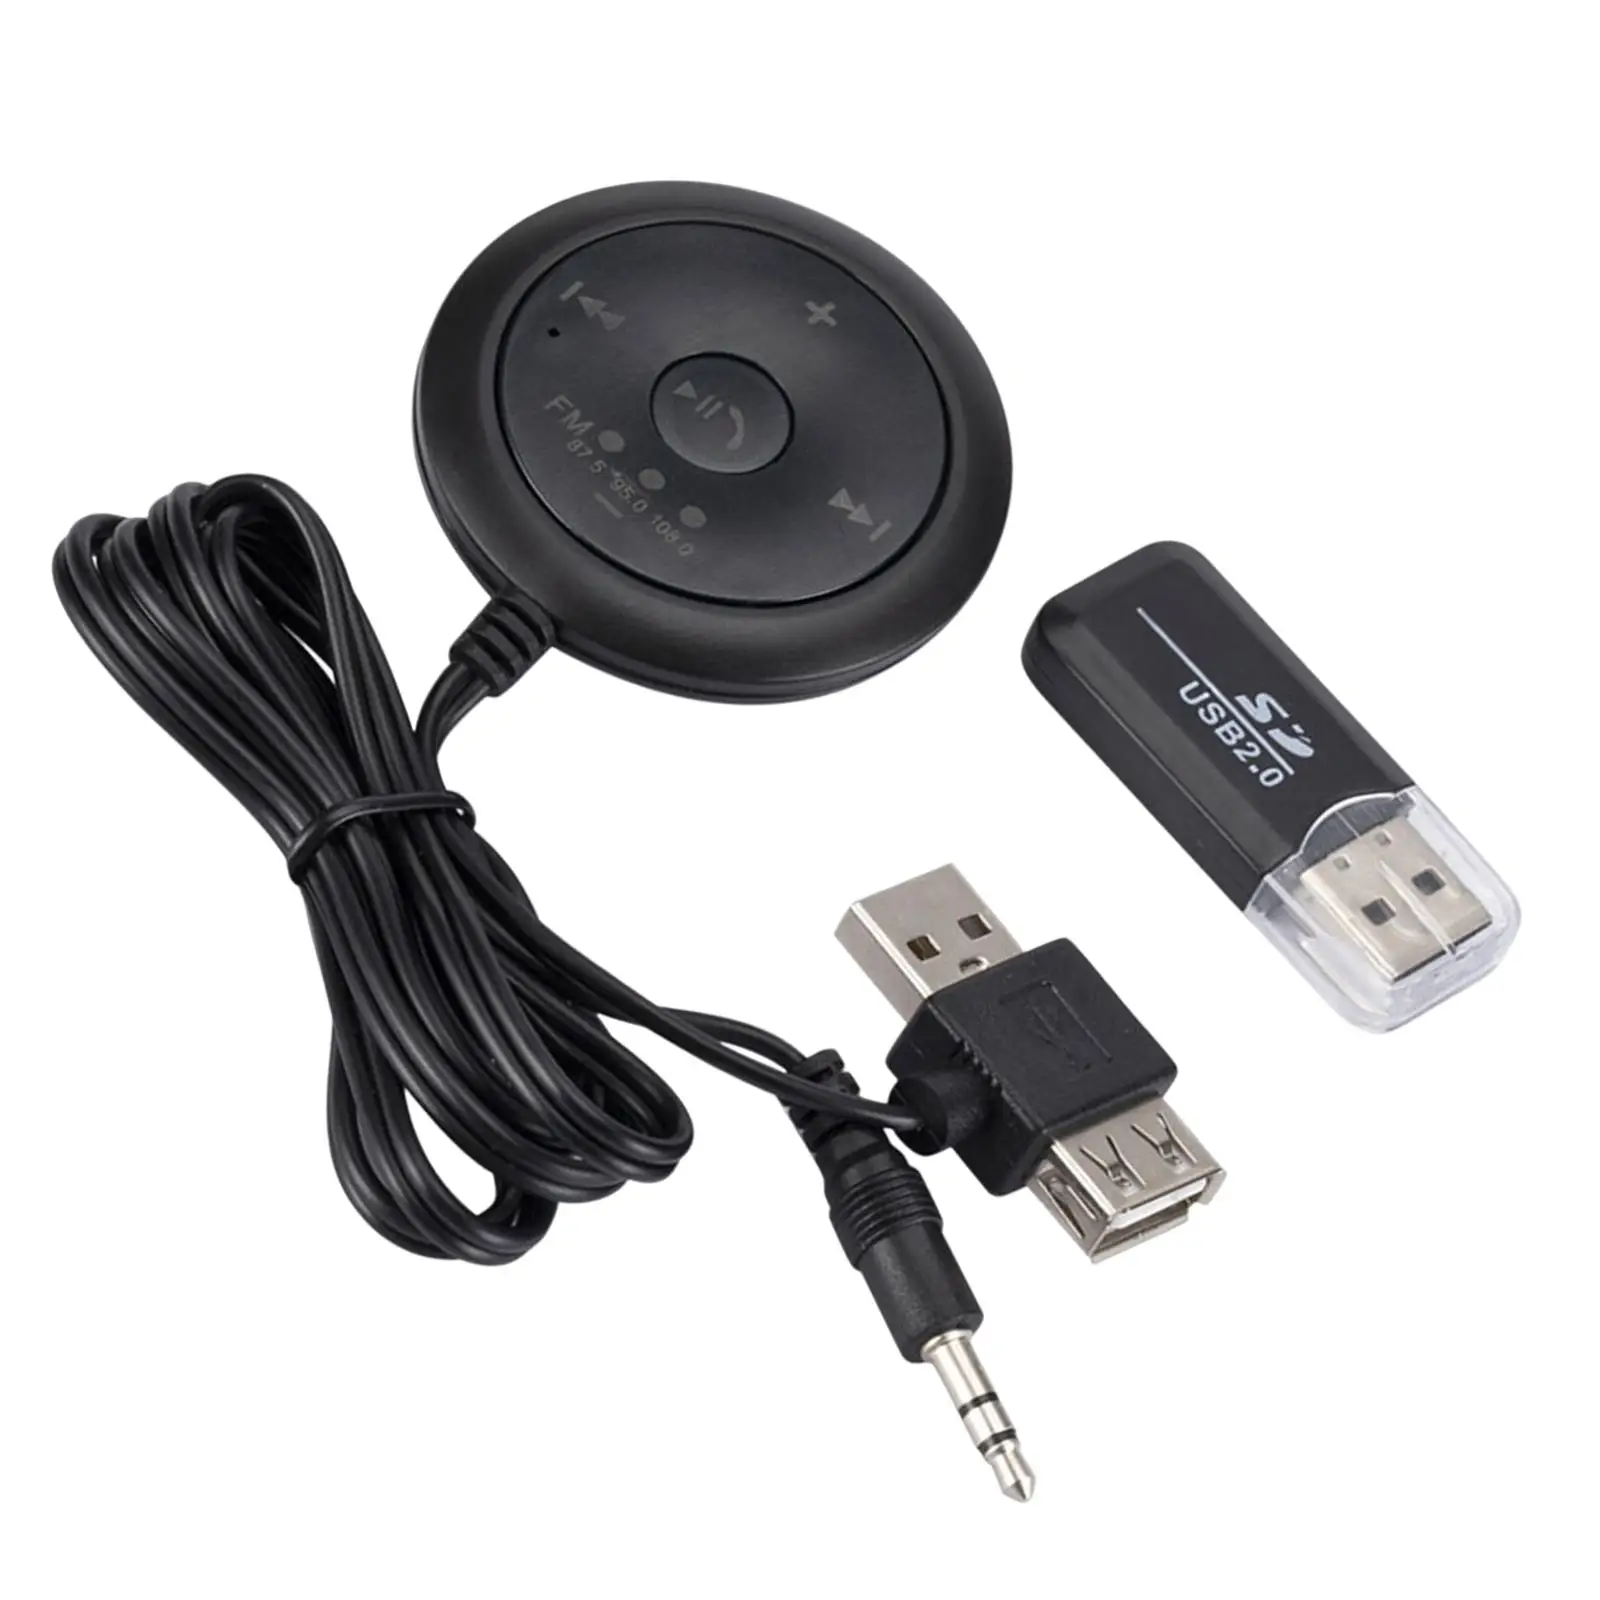 Wireless Car MP3 Player Headphones Receiver and Adapter for PC